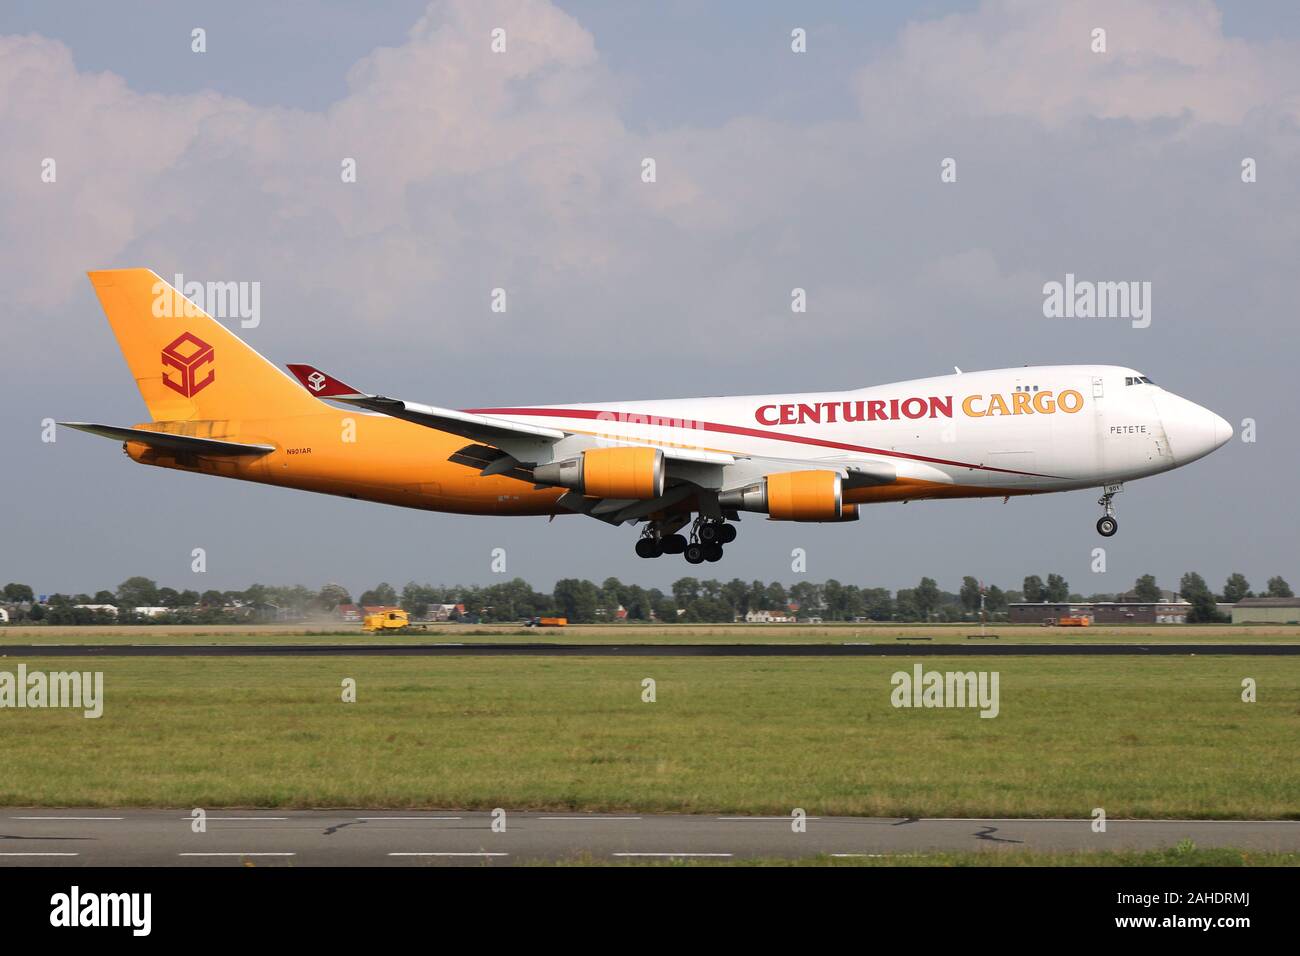 Centurion Cargo Boeing 747-400F with registration N901AR on short final for runway 18R (Polderbaan) of Amsterdam Airport Schiphol. Stock Photo